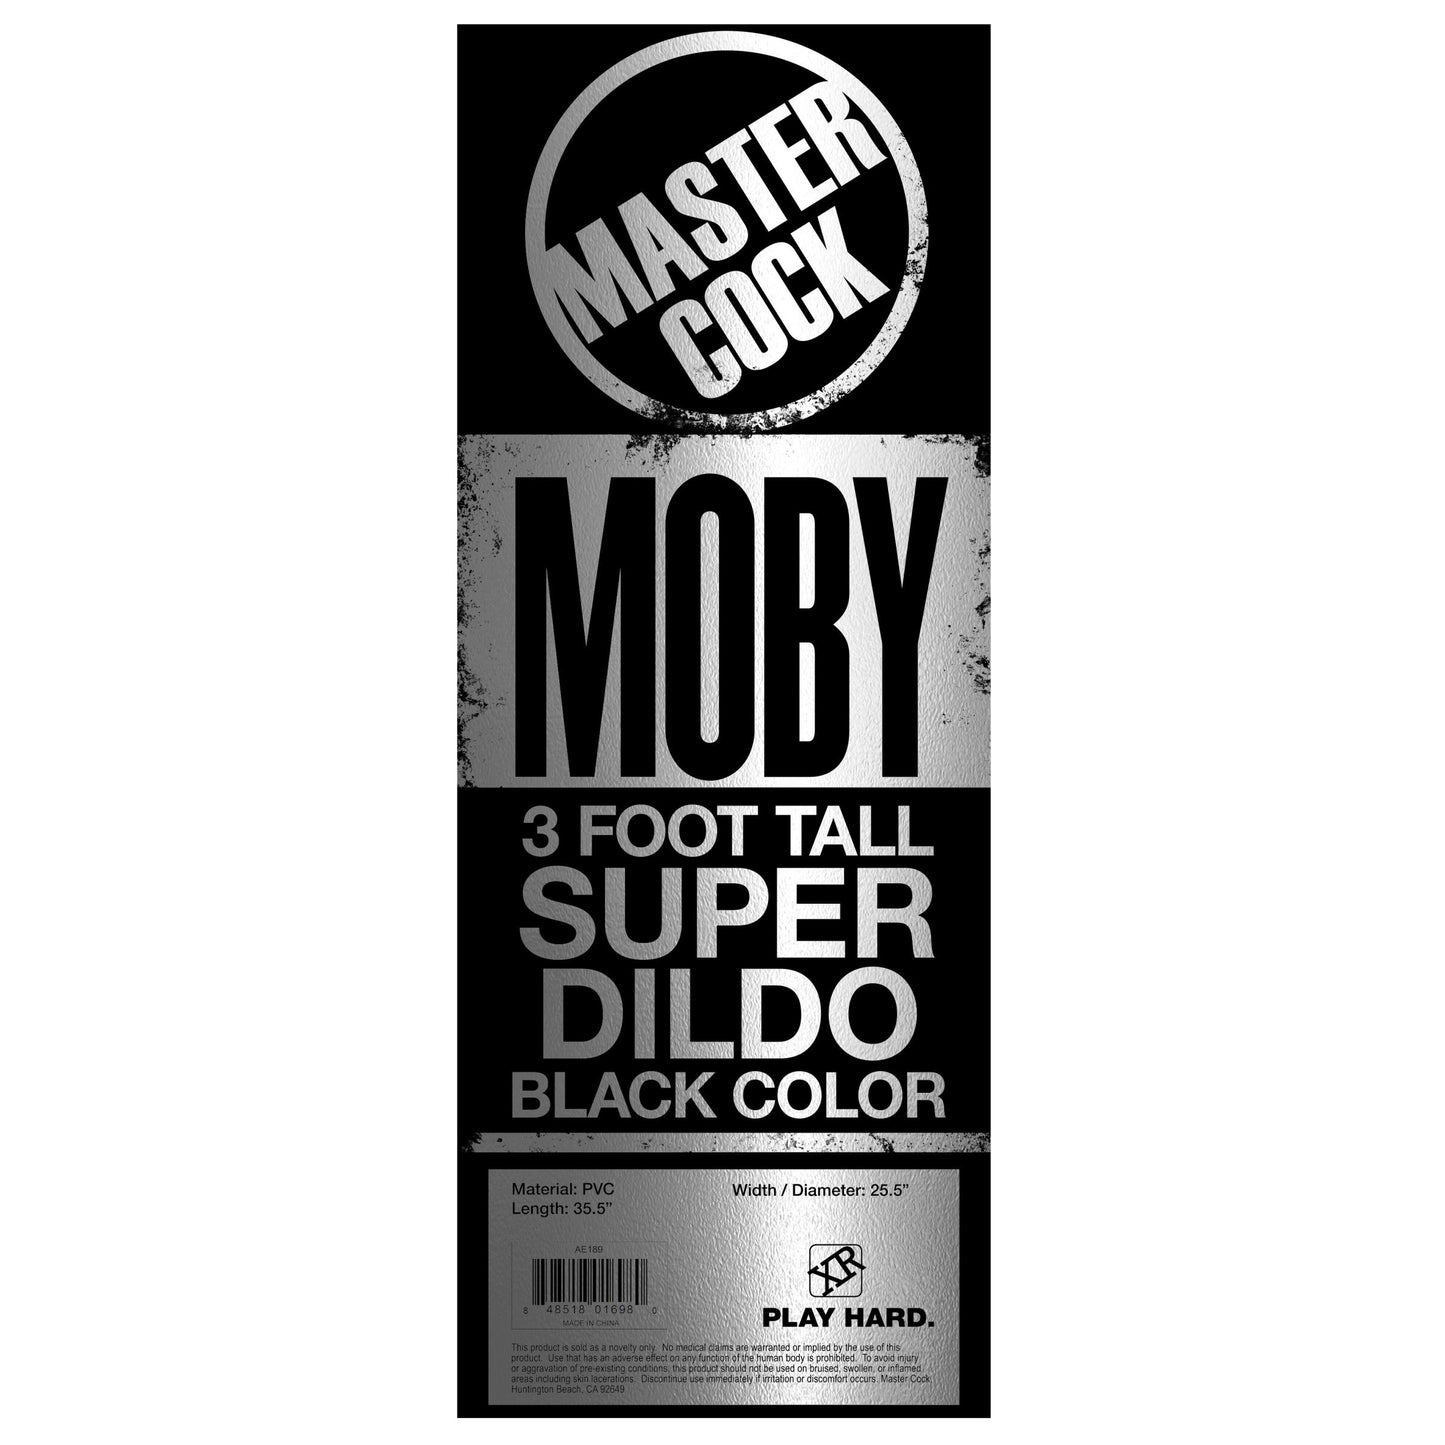 Moby Huge 3 Foot Tall Super Dildo - Black